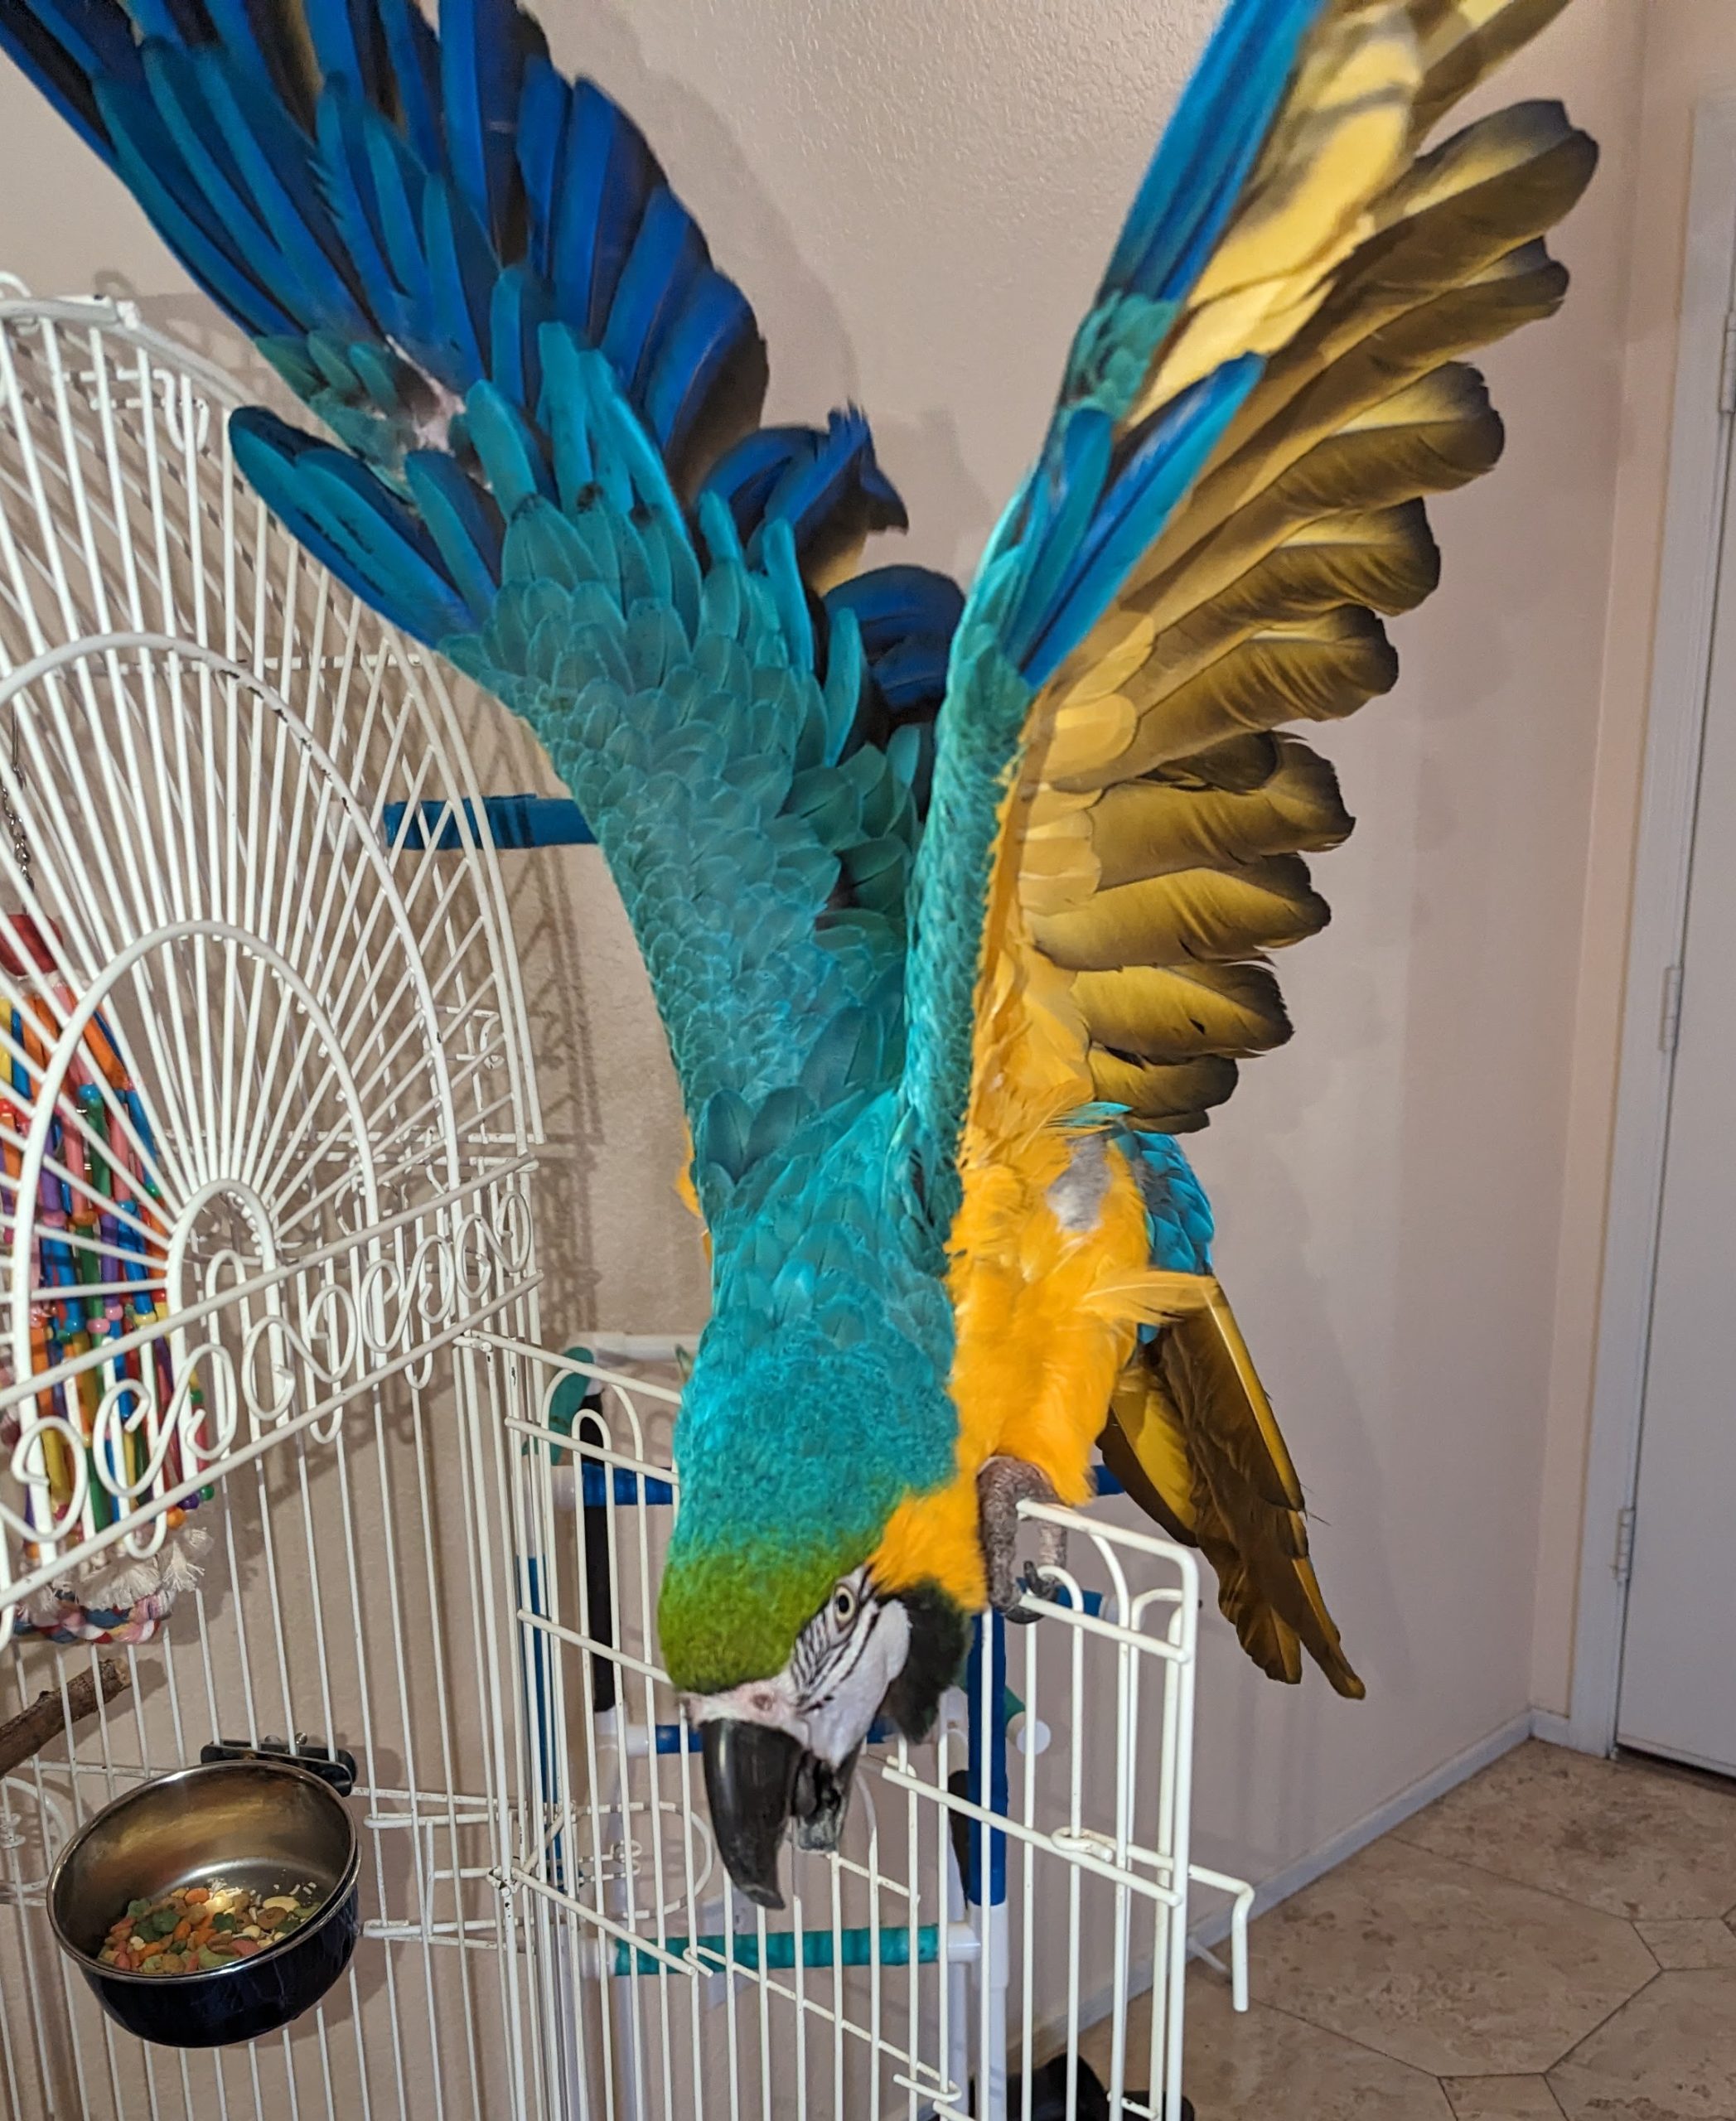 The Benefits of Adopting a Parrot as a Pet